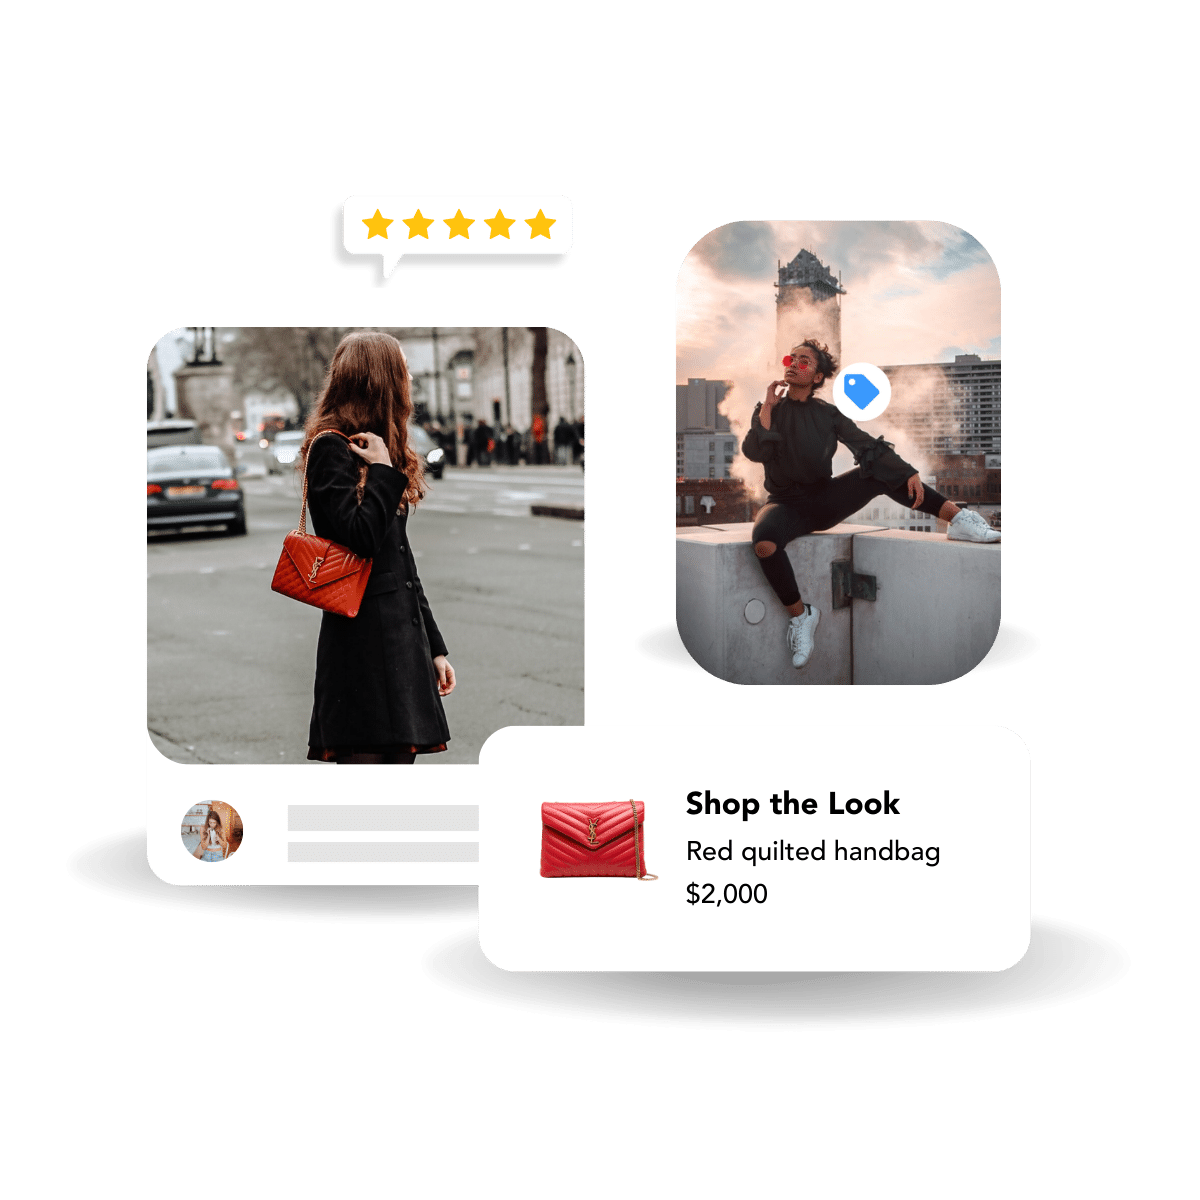 UGC of a woman wearing a red purse with a shoppable CTA to shop the look